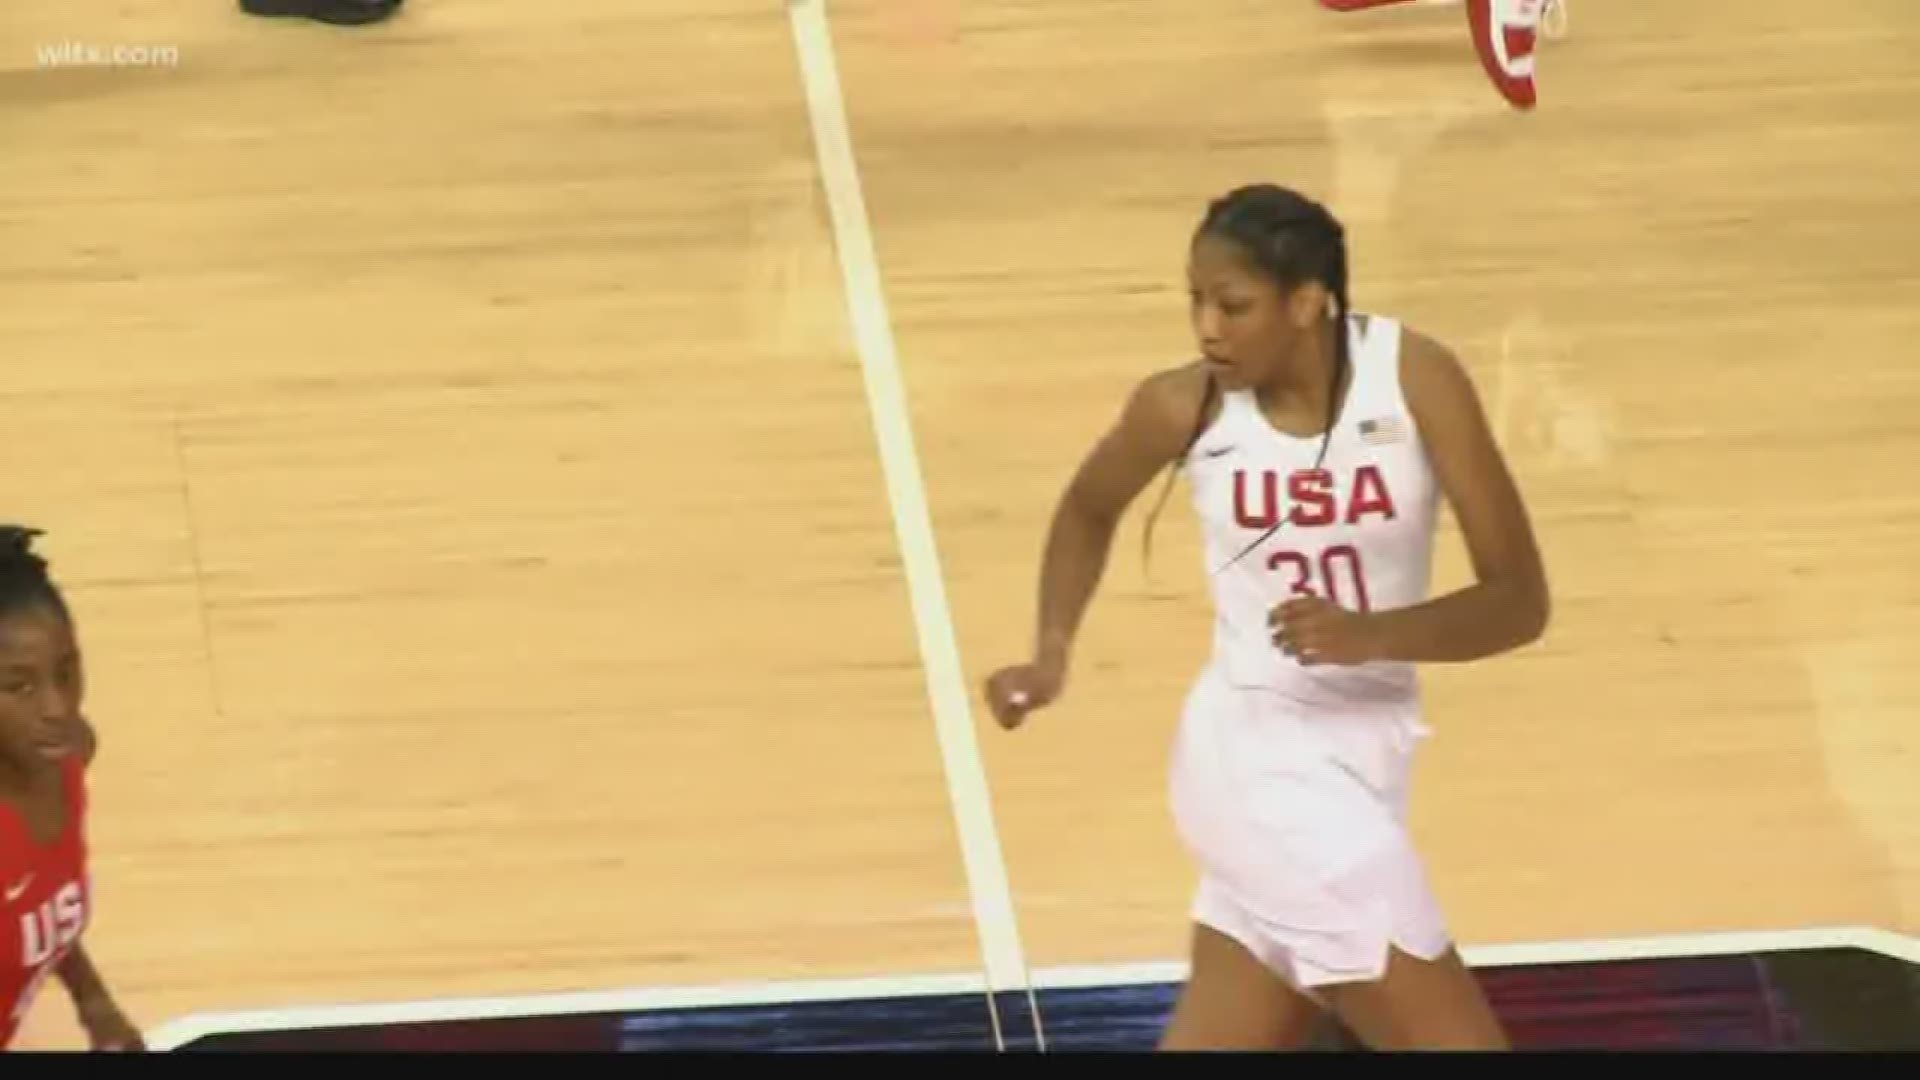 There were almost enough players on Team USA to put out a starting five. Four players with USC connections were on the floor in Wednesday's exhibition which ended the Columbia leg of training camp.